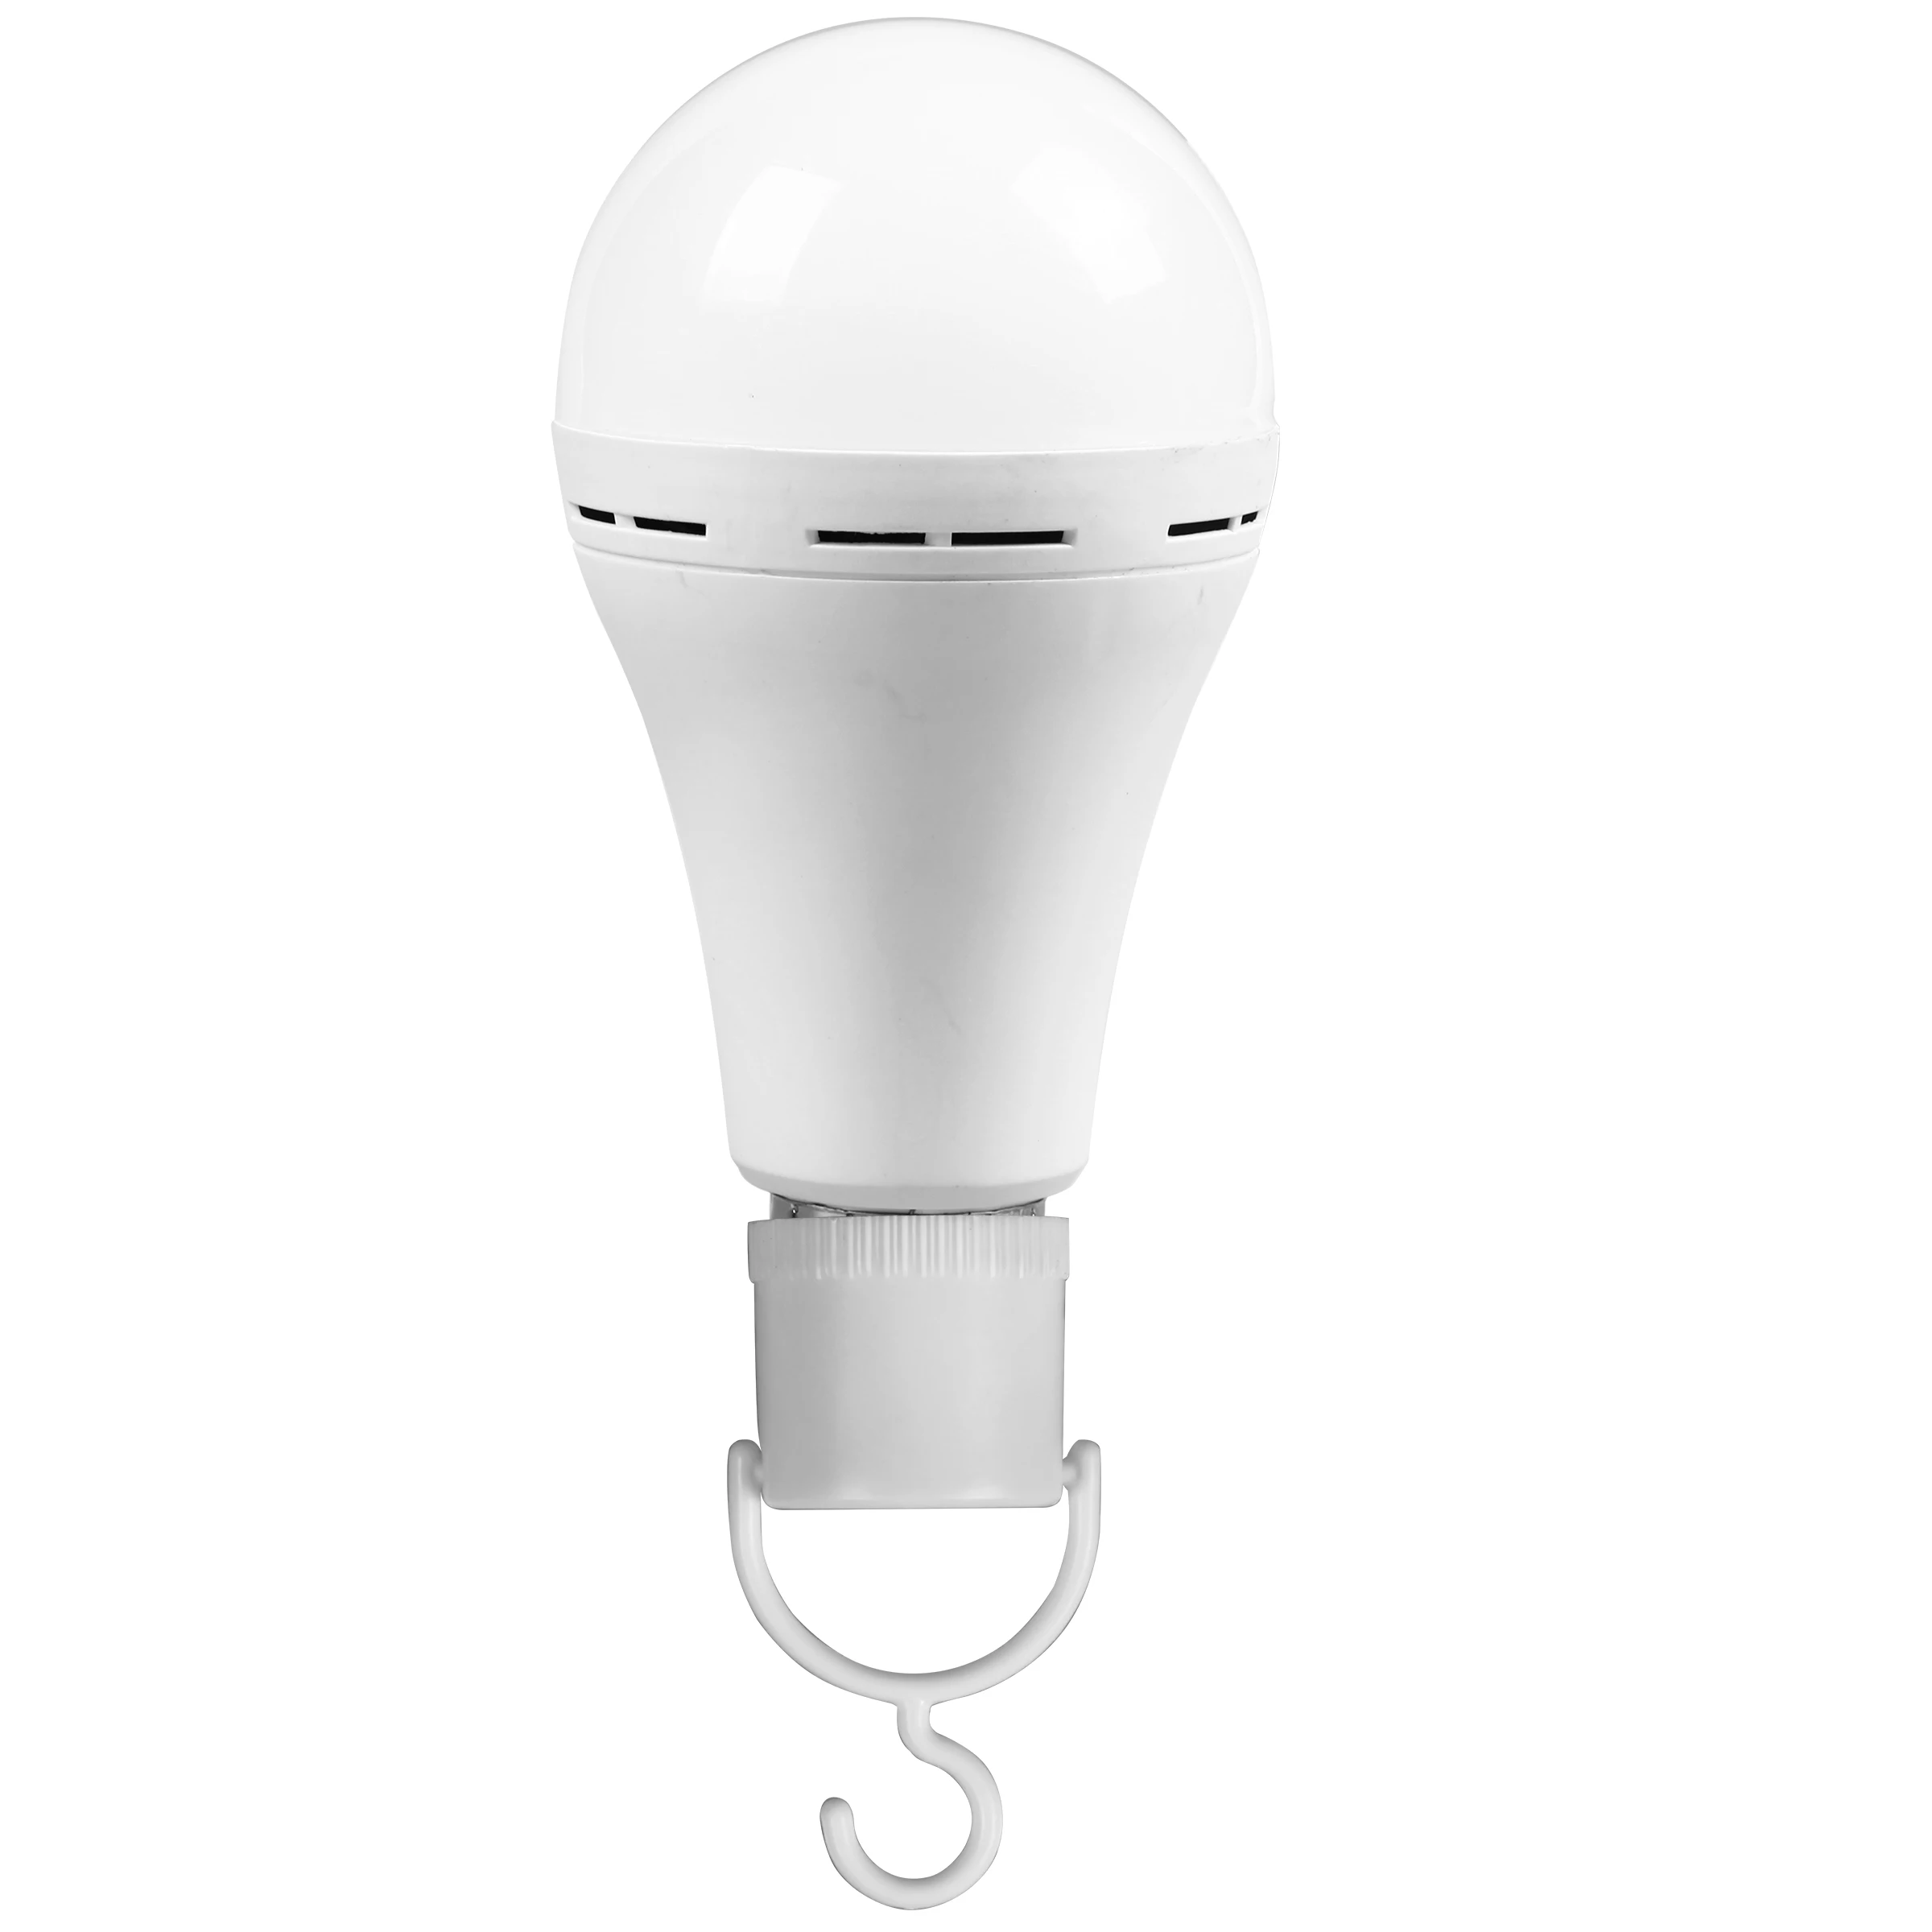 Rechargeable Emergency LED Bulb 6500K  7W 9W 12W Battery Operated Light Bulb E27 B22 for load shedding power outage